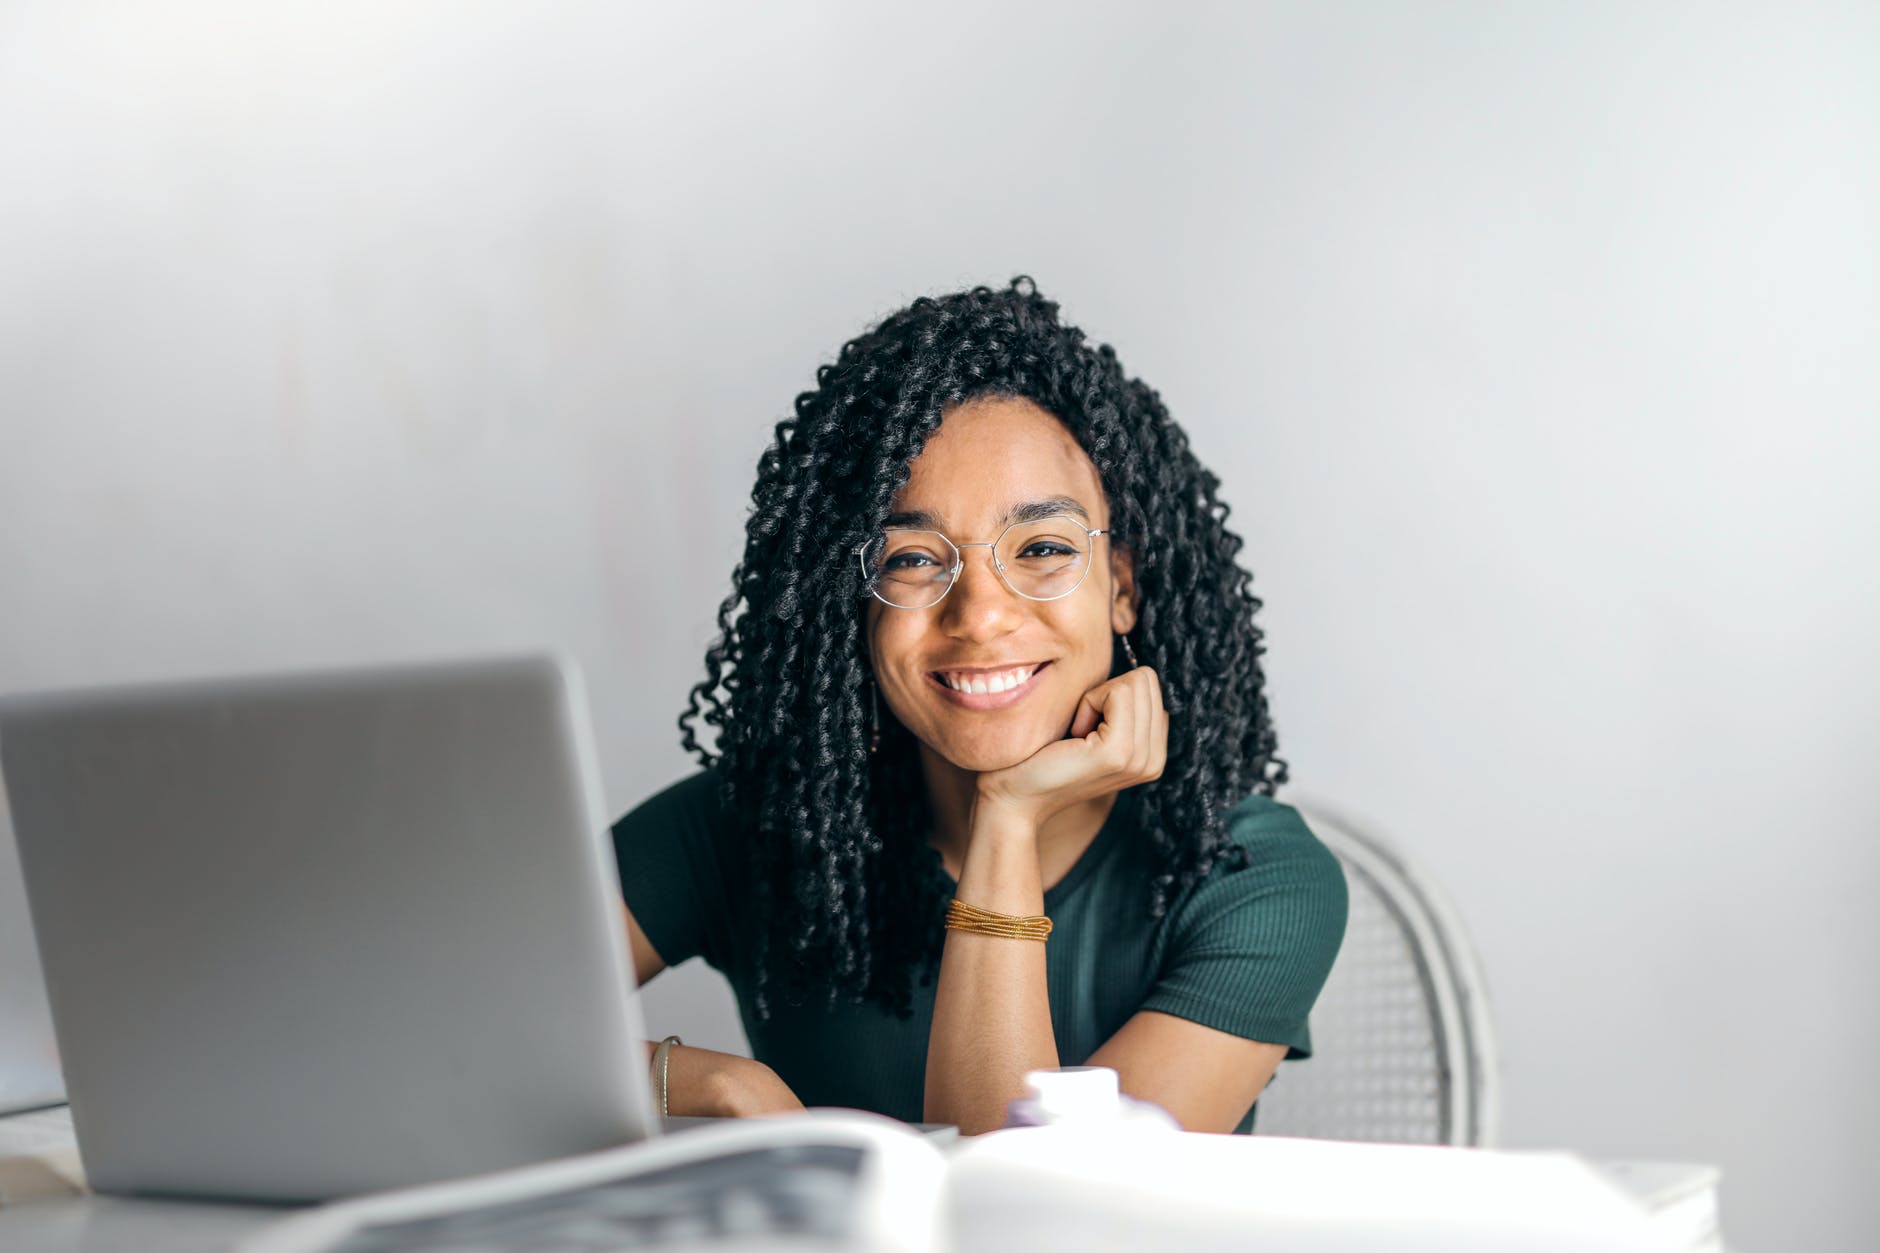 Woman with black curly hair and glasses smiling at the camera using a laptop 